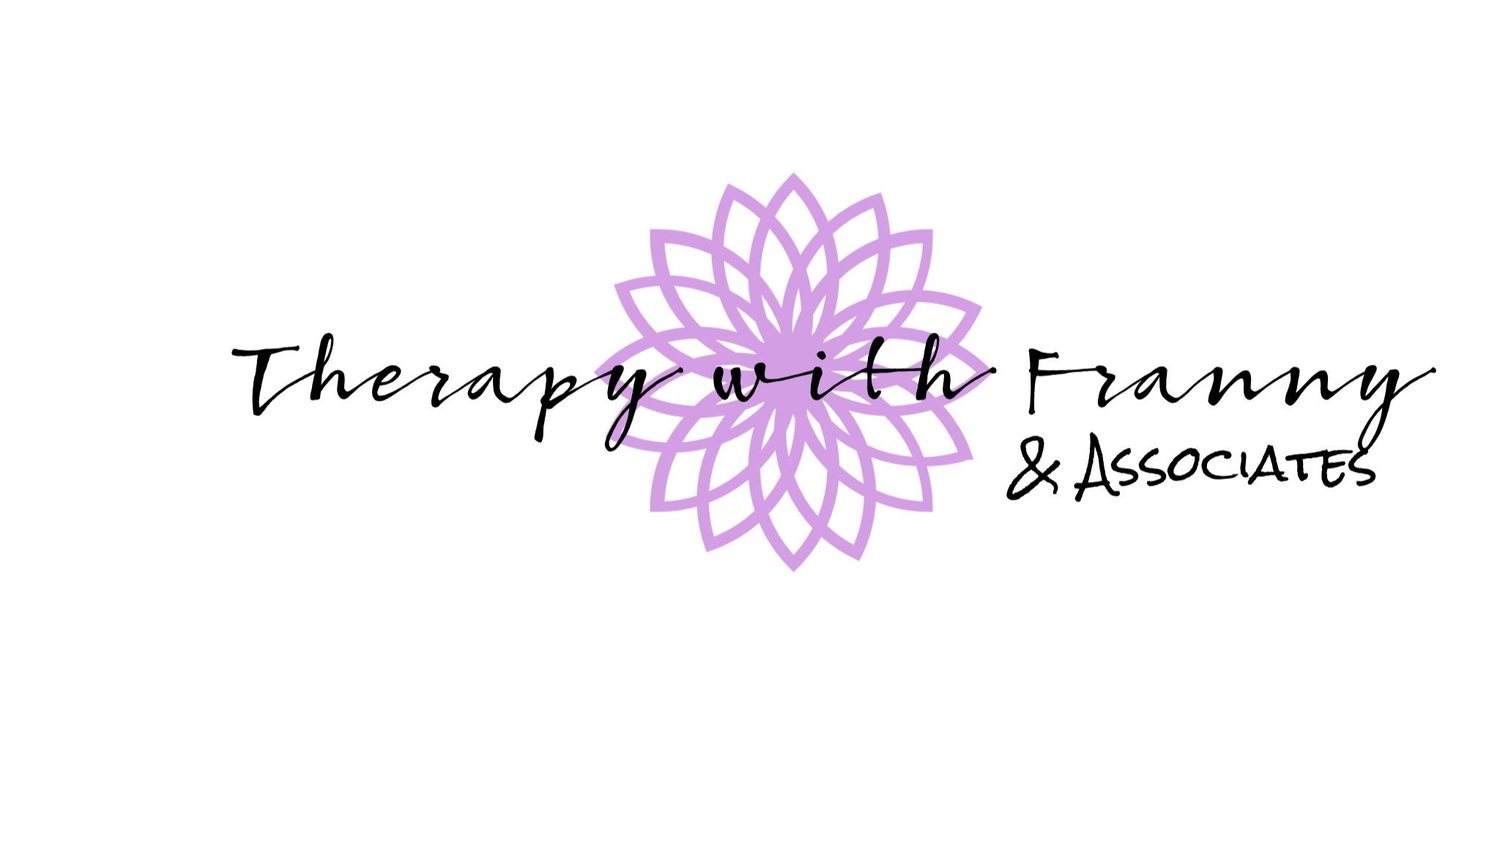 Therapy with Franny & Associates